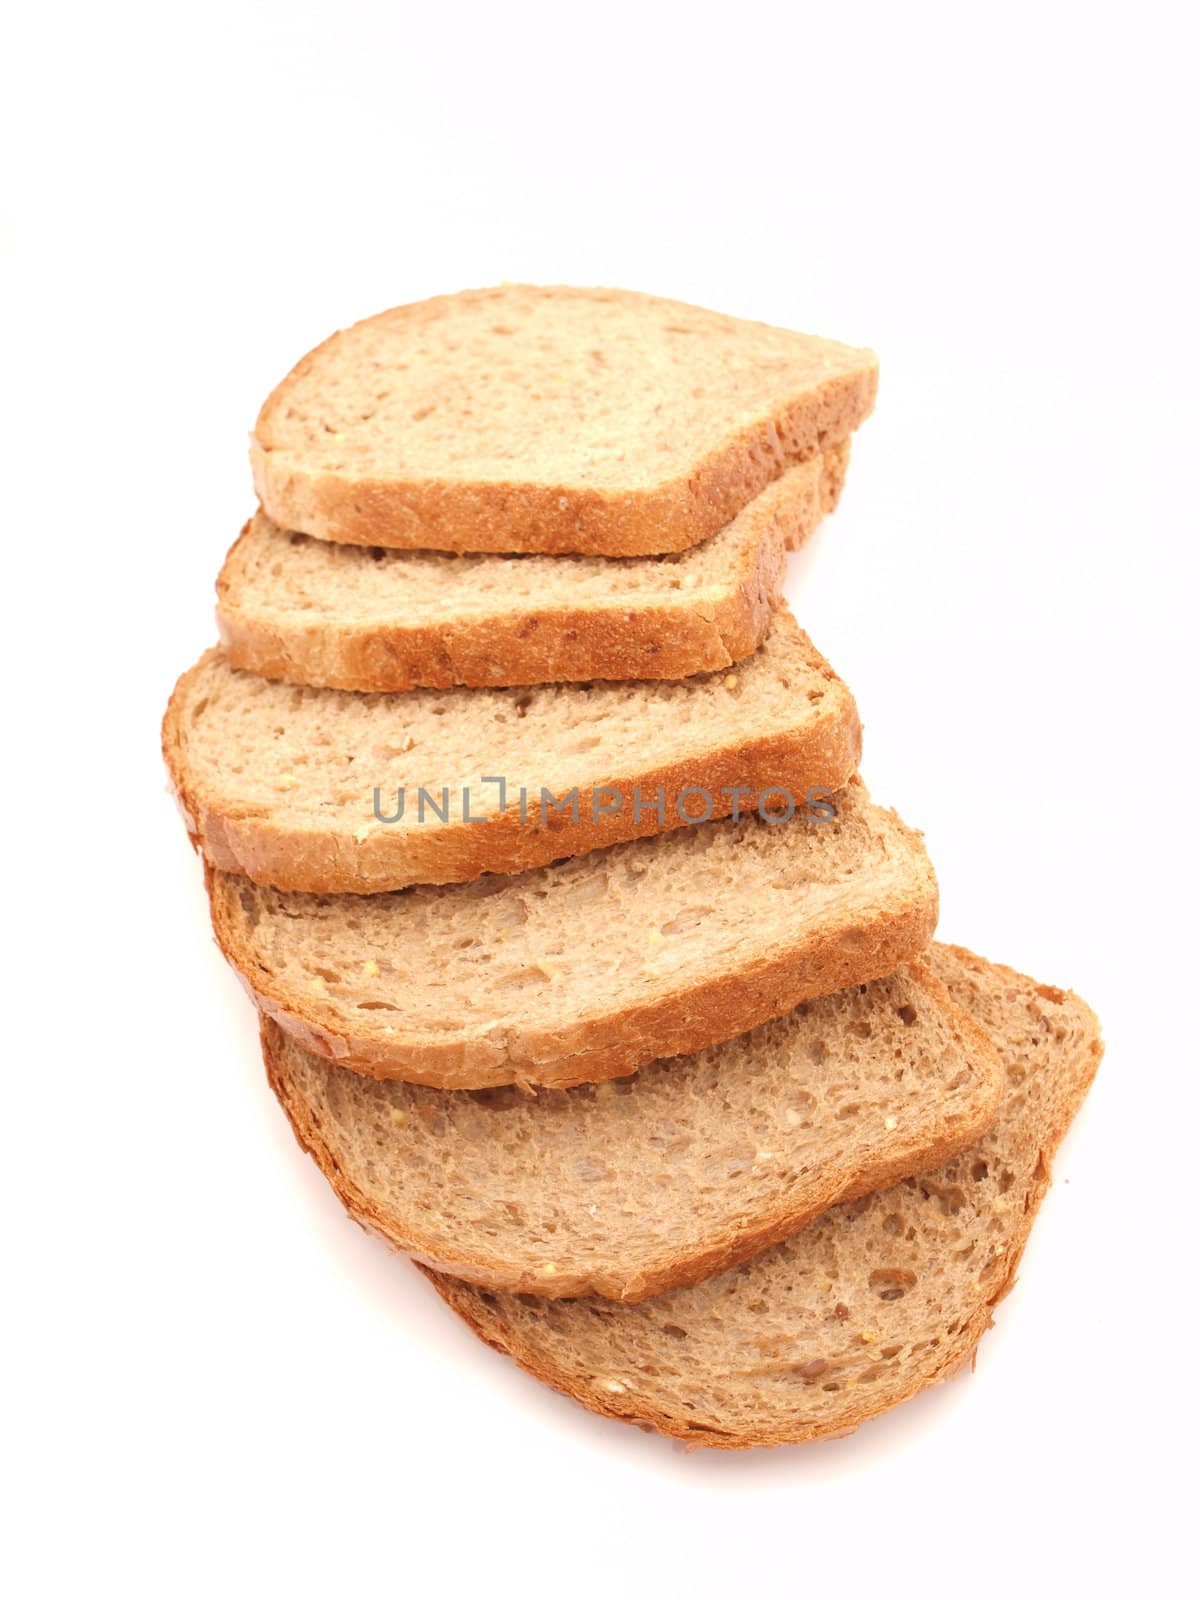 Bread on a white background          